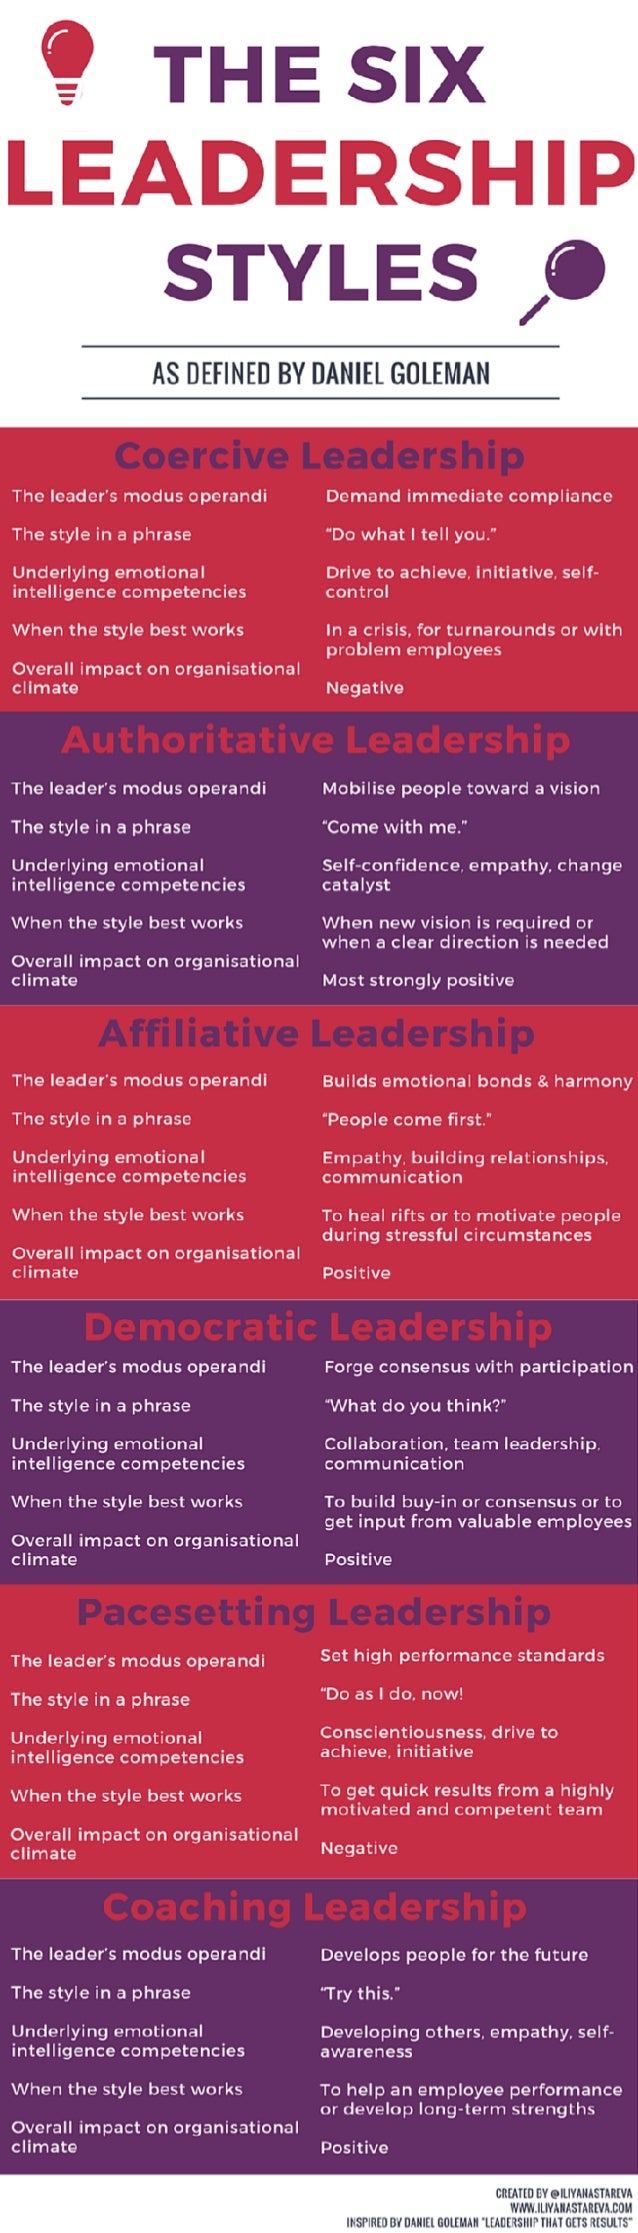 research work on leadership styles